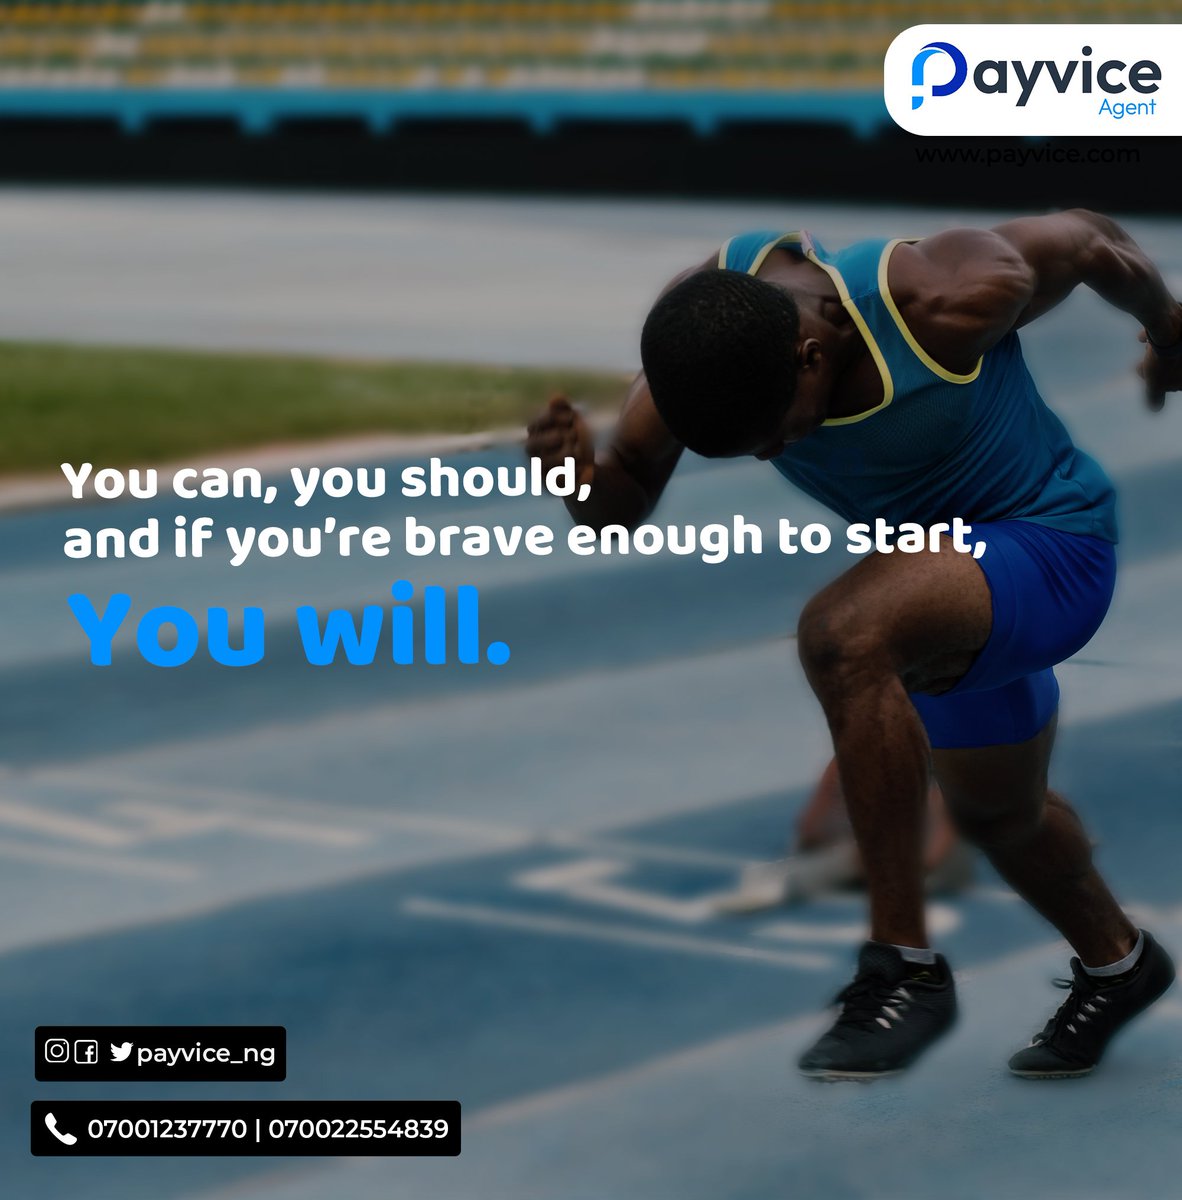 It takes courage to start but start anyways.

#Mondaymotivation
#AgencyBanking 
#BillsPayments